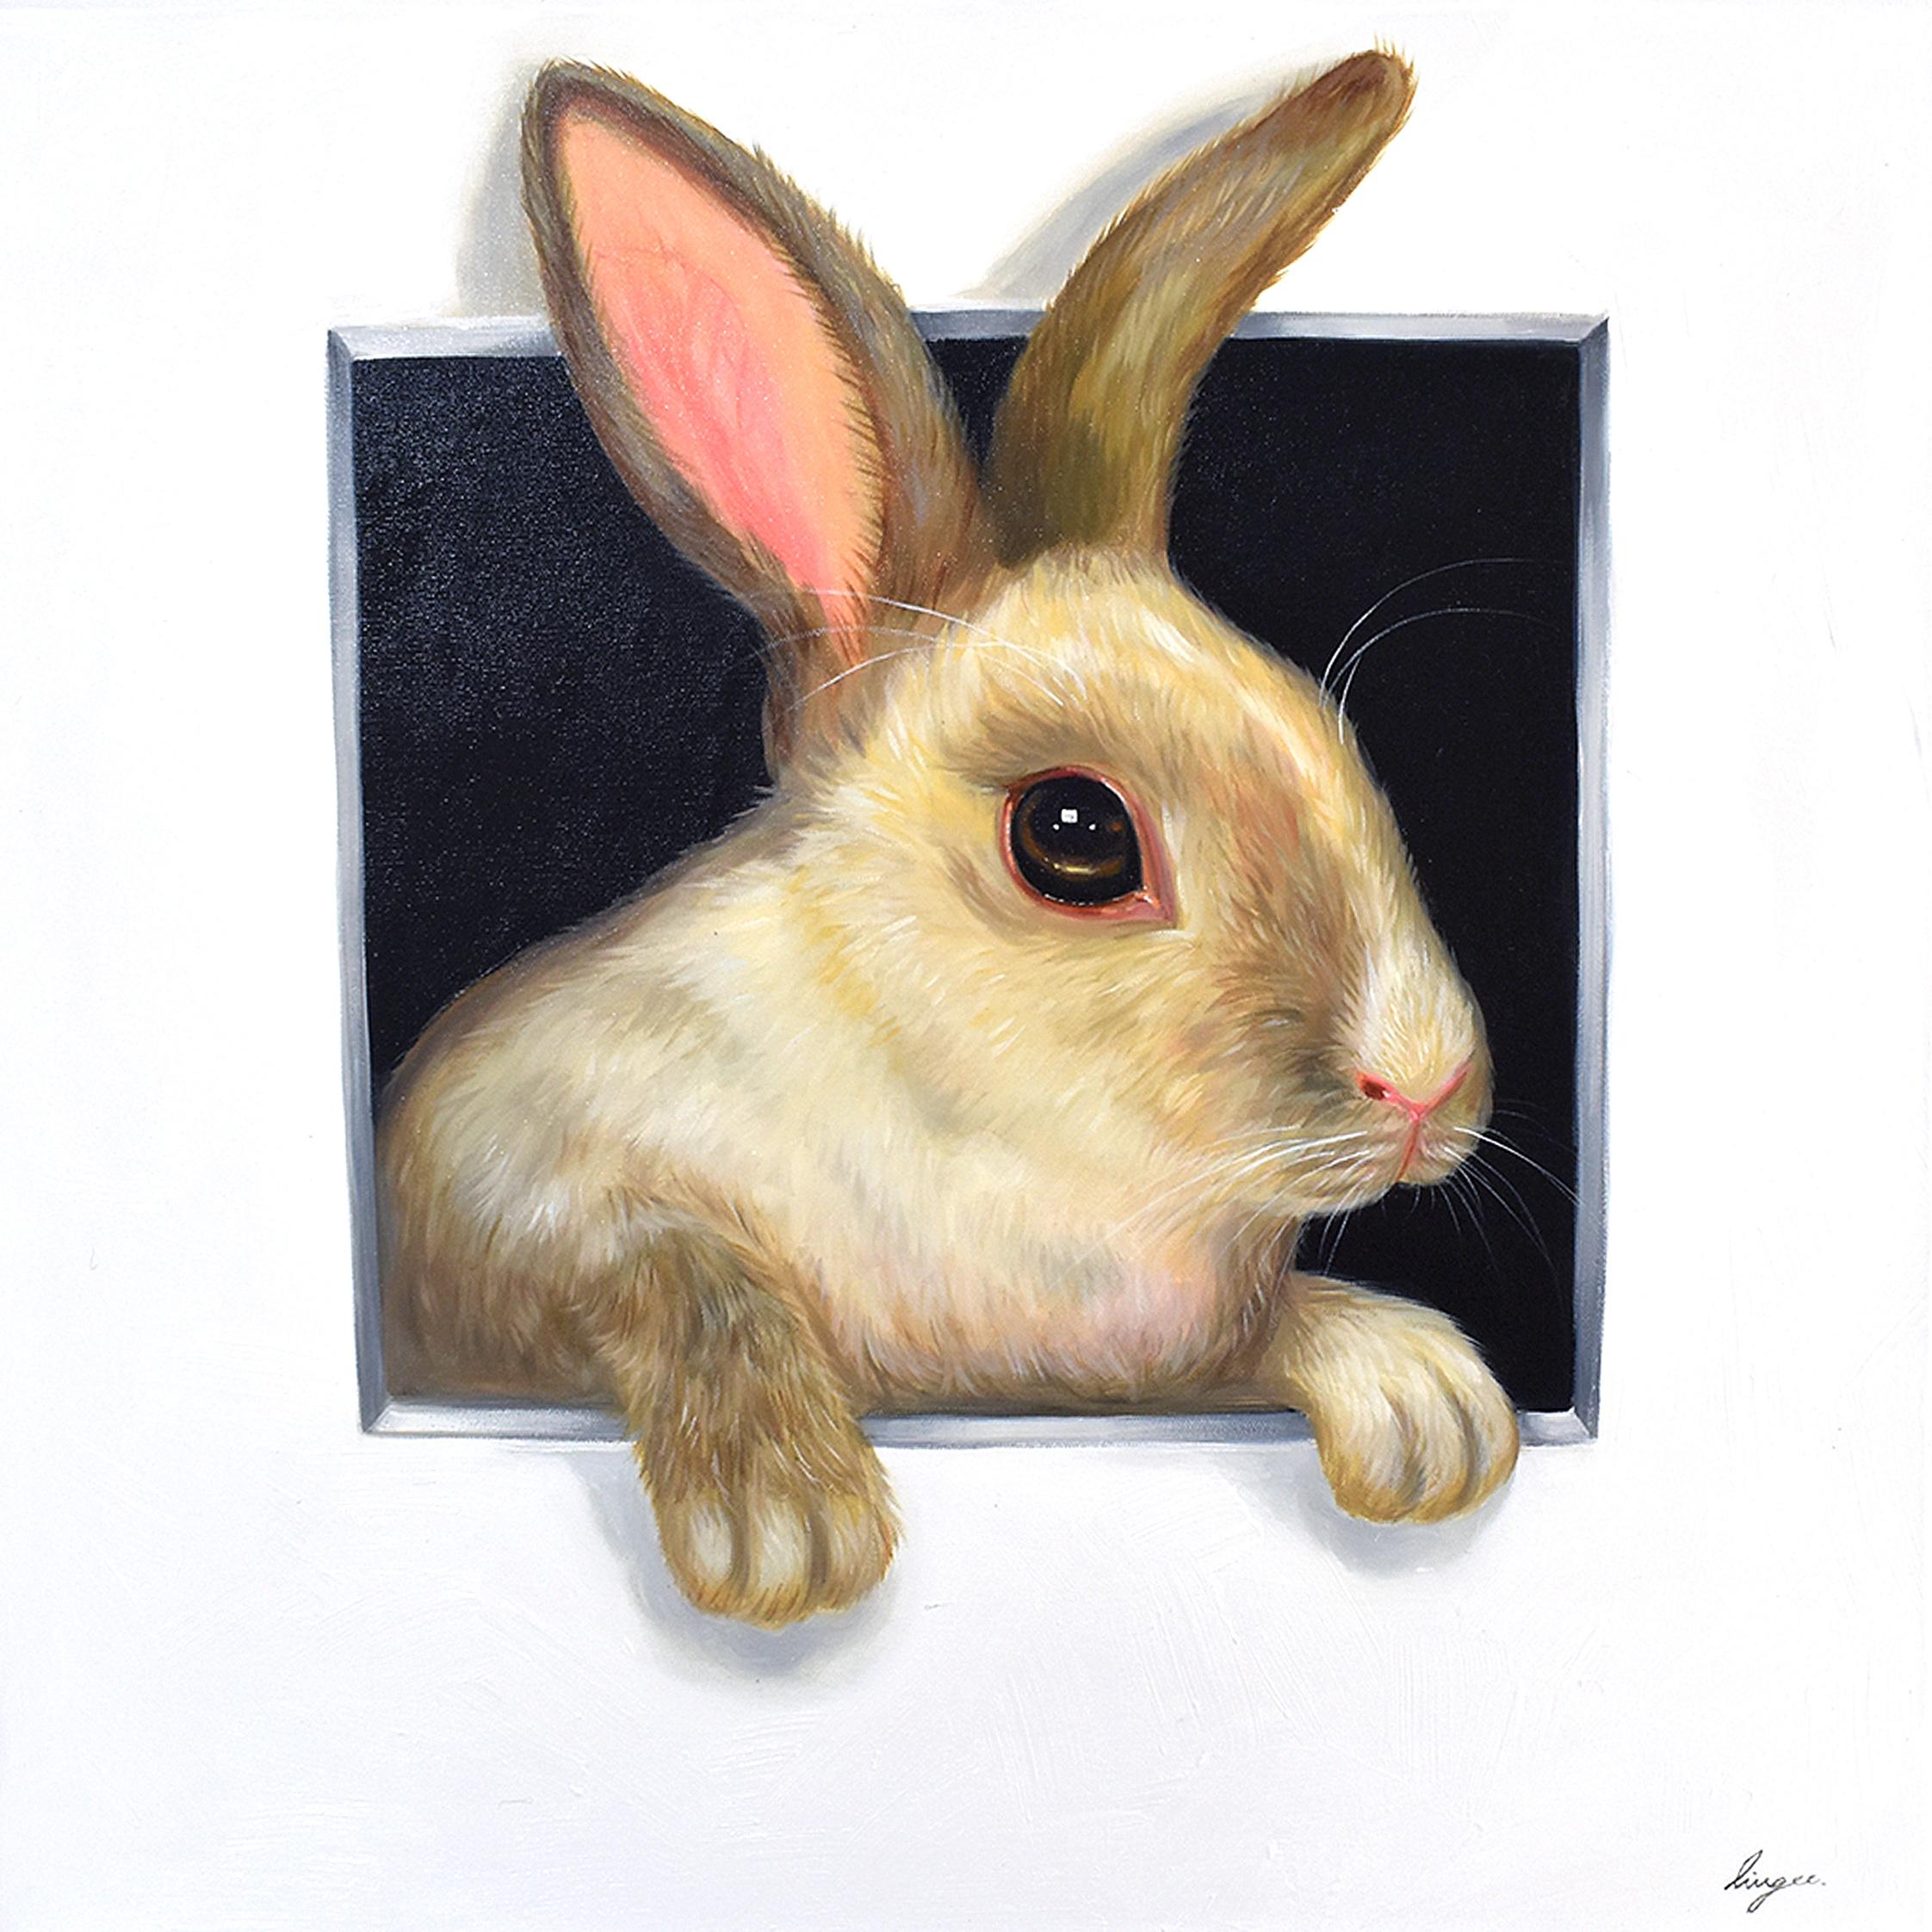 Lingee Bangkhuntod Animal Painting - Hare In Hole 4. Rabbit looking Through a Hole. Adorable rabbit Oil painting